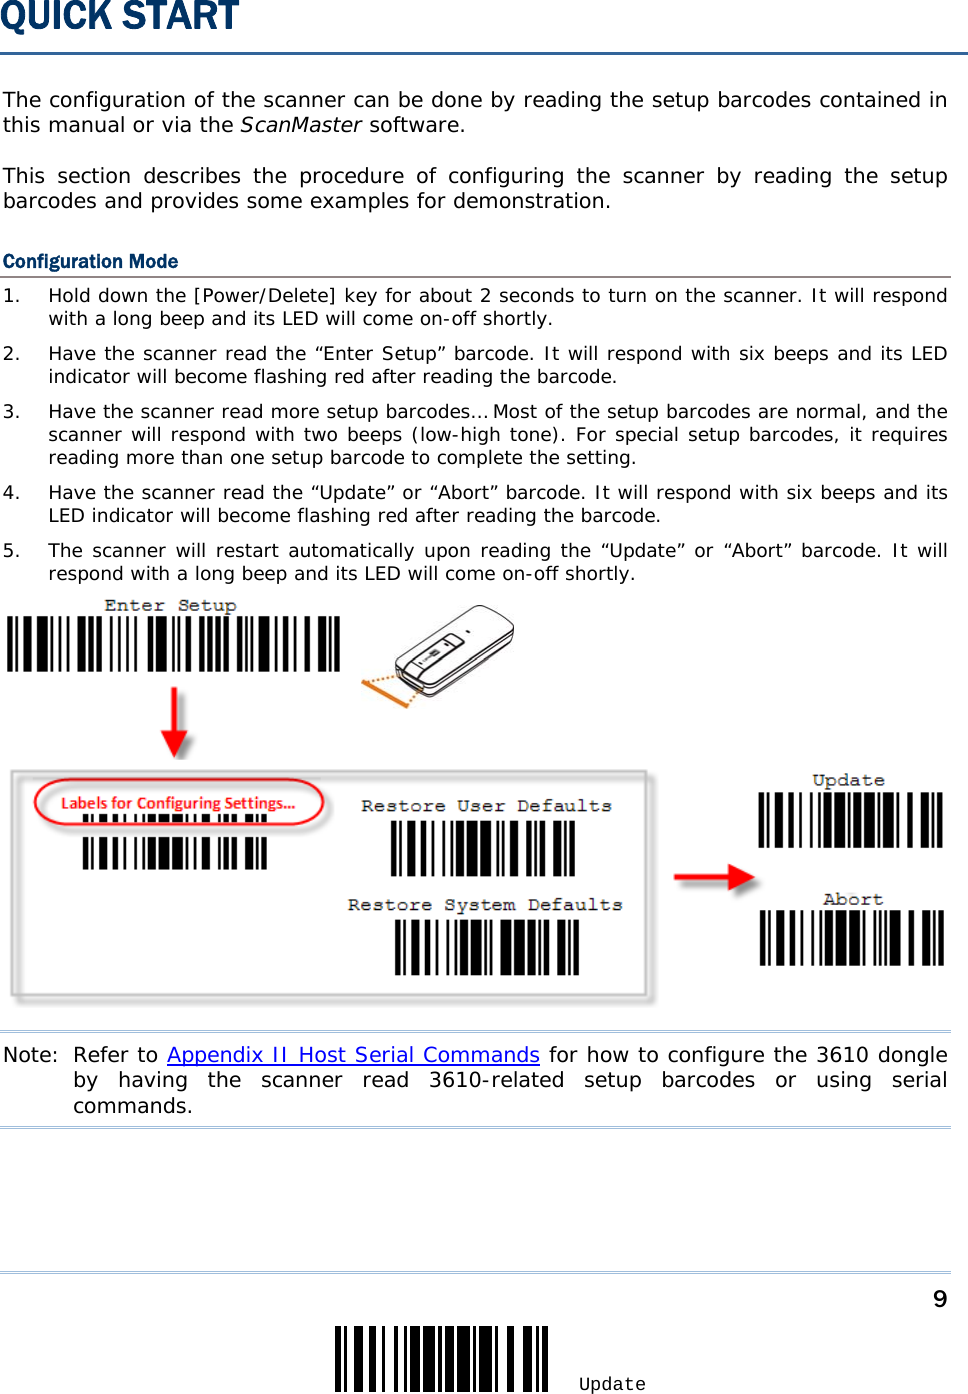     9 Update  The configuration of the scanner can be done by reading the setup barcodes contained in this manual or via the ScanMaster software.  This section describes the procedure of configuring the scanner by reading the setup barcodes and provides some examples for demonstration. Configuration Mode 1.  Hold down the [Power/Delete] key for about 2 seconds to turn on the scanner. It will respond with a long beep and its LED will come on-off shortly. 2.  Have the scanner read the “Enter Setup” barcode. It will respond with six beeps and its LED indicator will become flashing red after reading the barcode. 3.  Have the scanner read more setup barcodes… Most of the setup barcodes are normal, and the scanner will respond with two beeps (low-high tone). For special setup barcodes, it requires reading more than one setup barcode to complete the setting. 4.  Have the scanner read the “Update” or “Abort” barcode. It will respond with six beeps and its LED indicator will become flashing red after reading the barcode. 5.  The scanner will restart automatically upon reading the “Update” or “Abort” barcode. It will respond with a long beep and its LED will come on-off shortly.  Note: Refer to Appendix II Host Serial Commands for how to configure the 3610 dongle by having the scanner read 3610-related setup barcodes or using serial commands.  QUICK START 